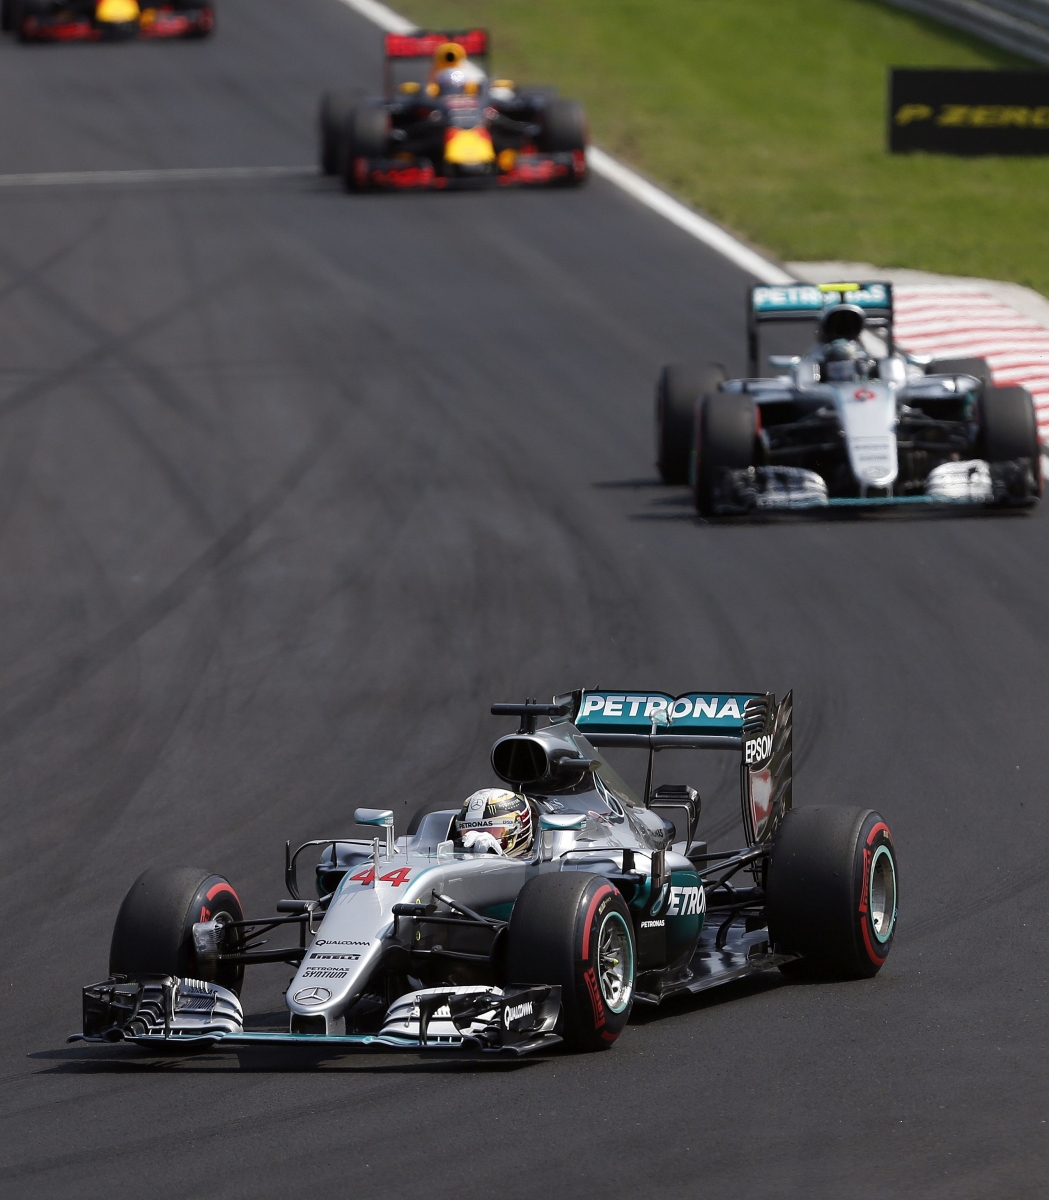 Mercedes driver Lewis Hamilton of Britain leads ahead of Mercedes driver Nico Rosberg of Germany and Red Bull driver Daniel Ricciardo of Australia, rear, during the Hungarian Formula One Grand Prix at the Hungaroring racetrack near Budapest, Hungary, Sunday, July 24, 2016.(AP Photo/Darko Vojinovic)